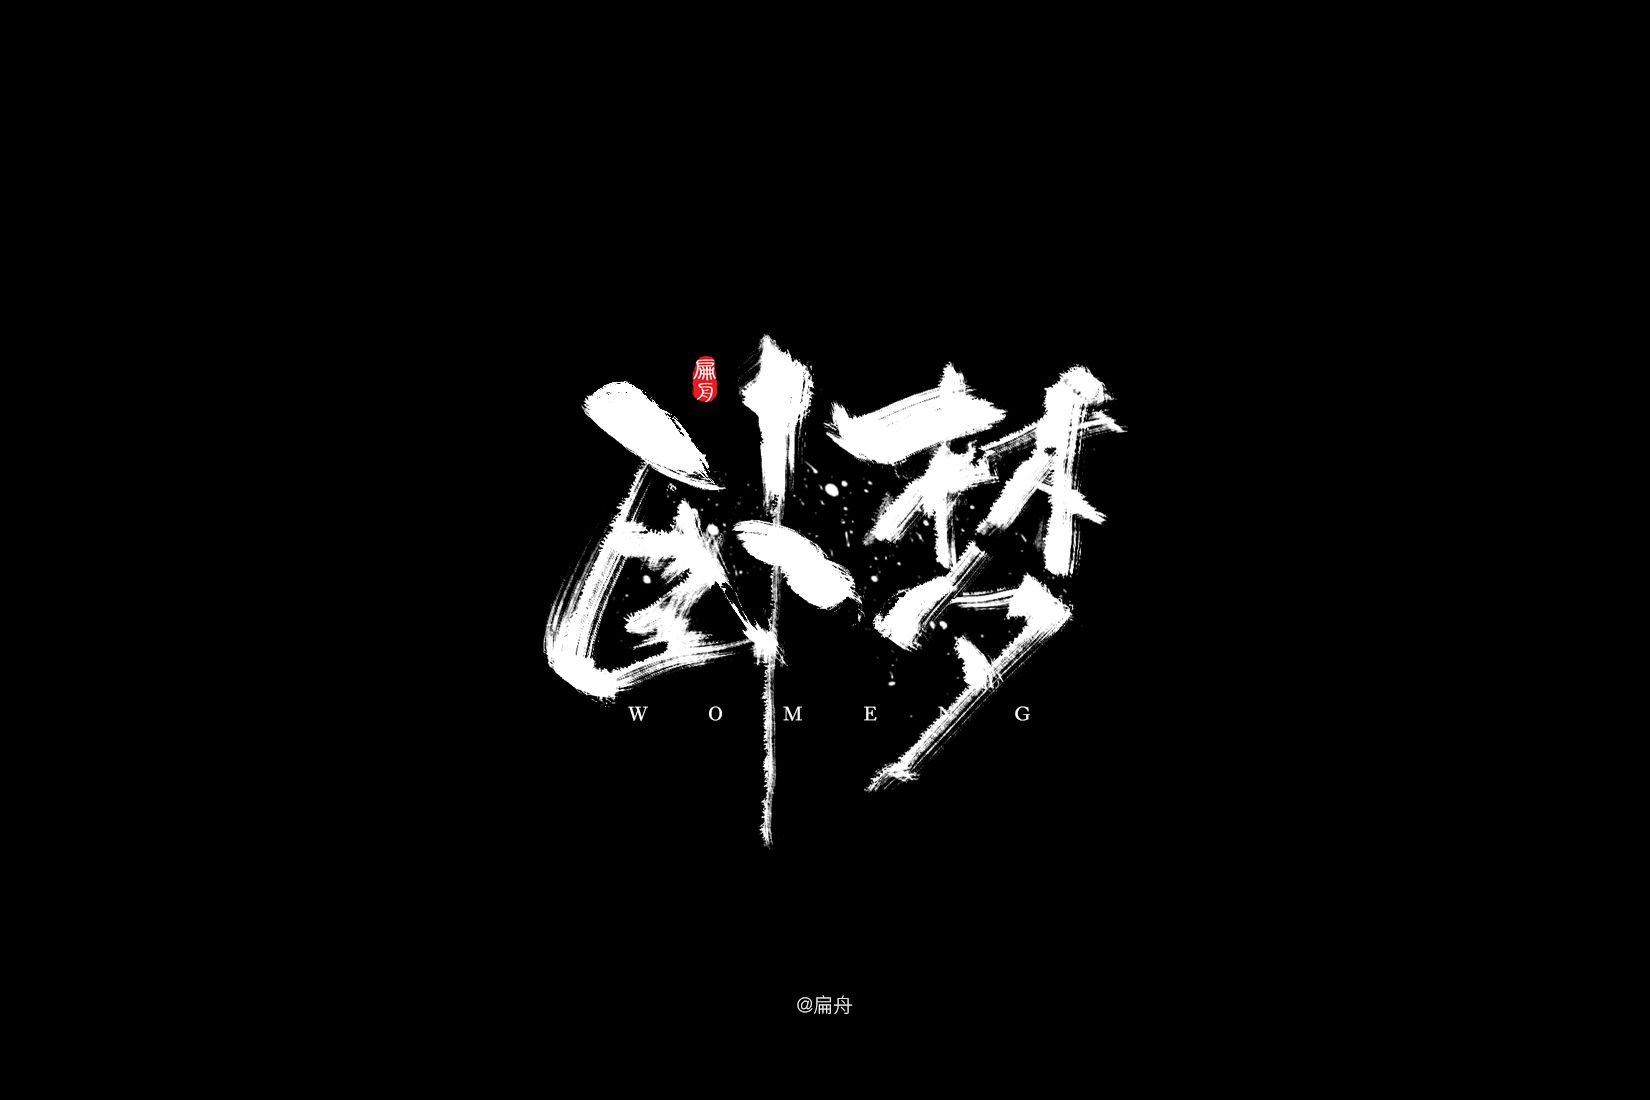 Chinese font design-Do you like this style of writing brush